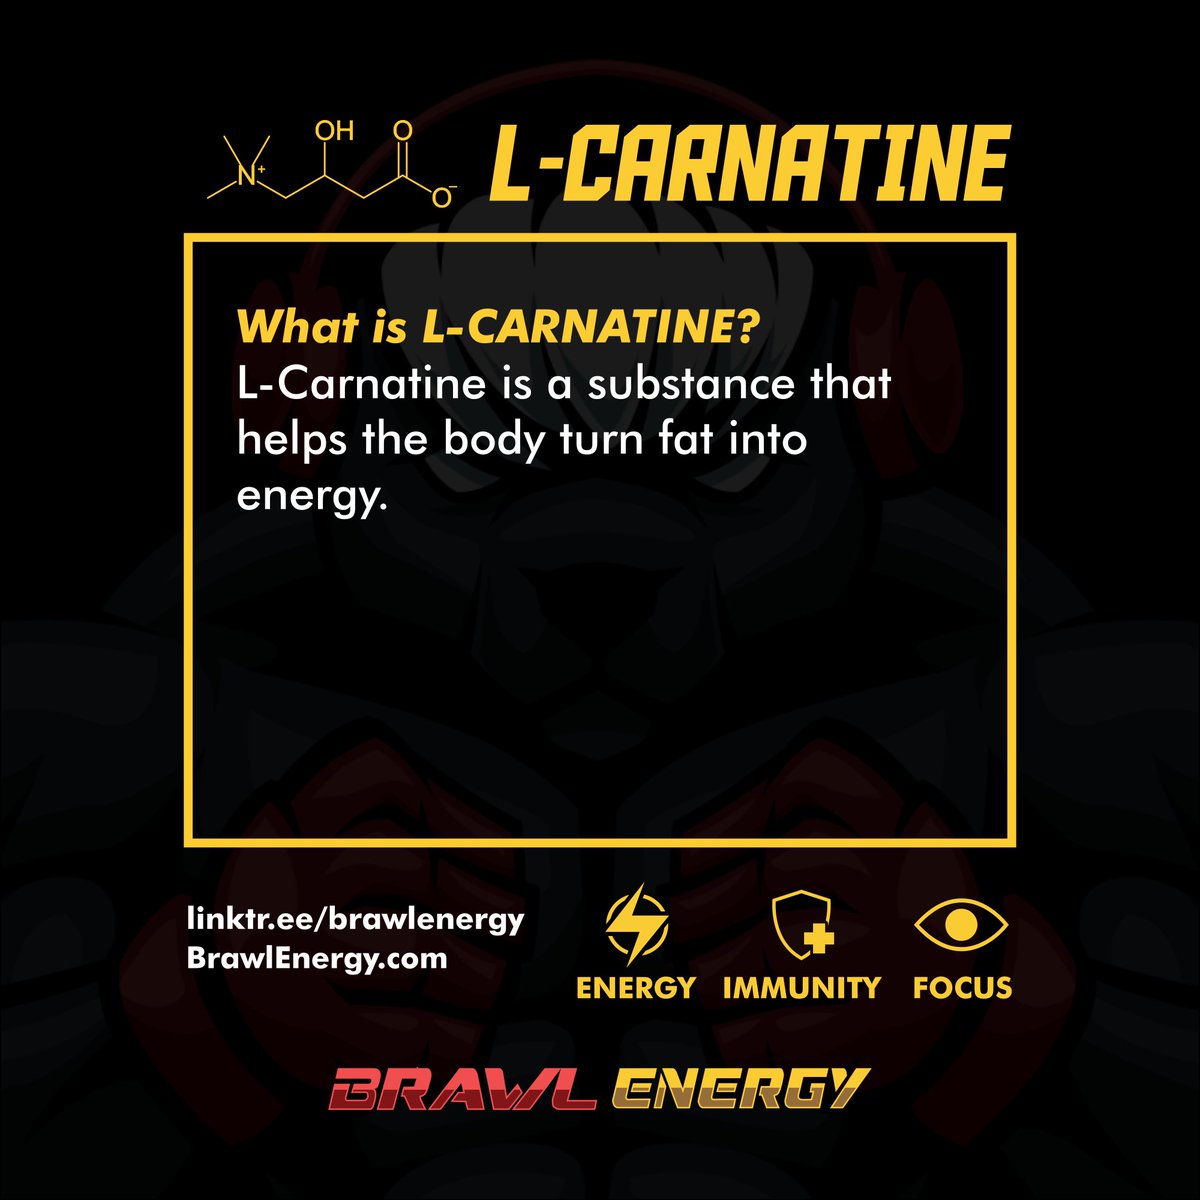 Brawl Energy Ingredient Education: L-Carnitine is in our GTAC-5 stack and this is why! #brawlenergy #energydrink #brawl #boxing #mma #bjj #karate #bareknuckle #education